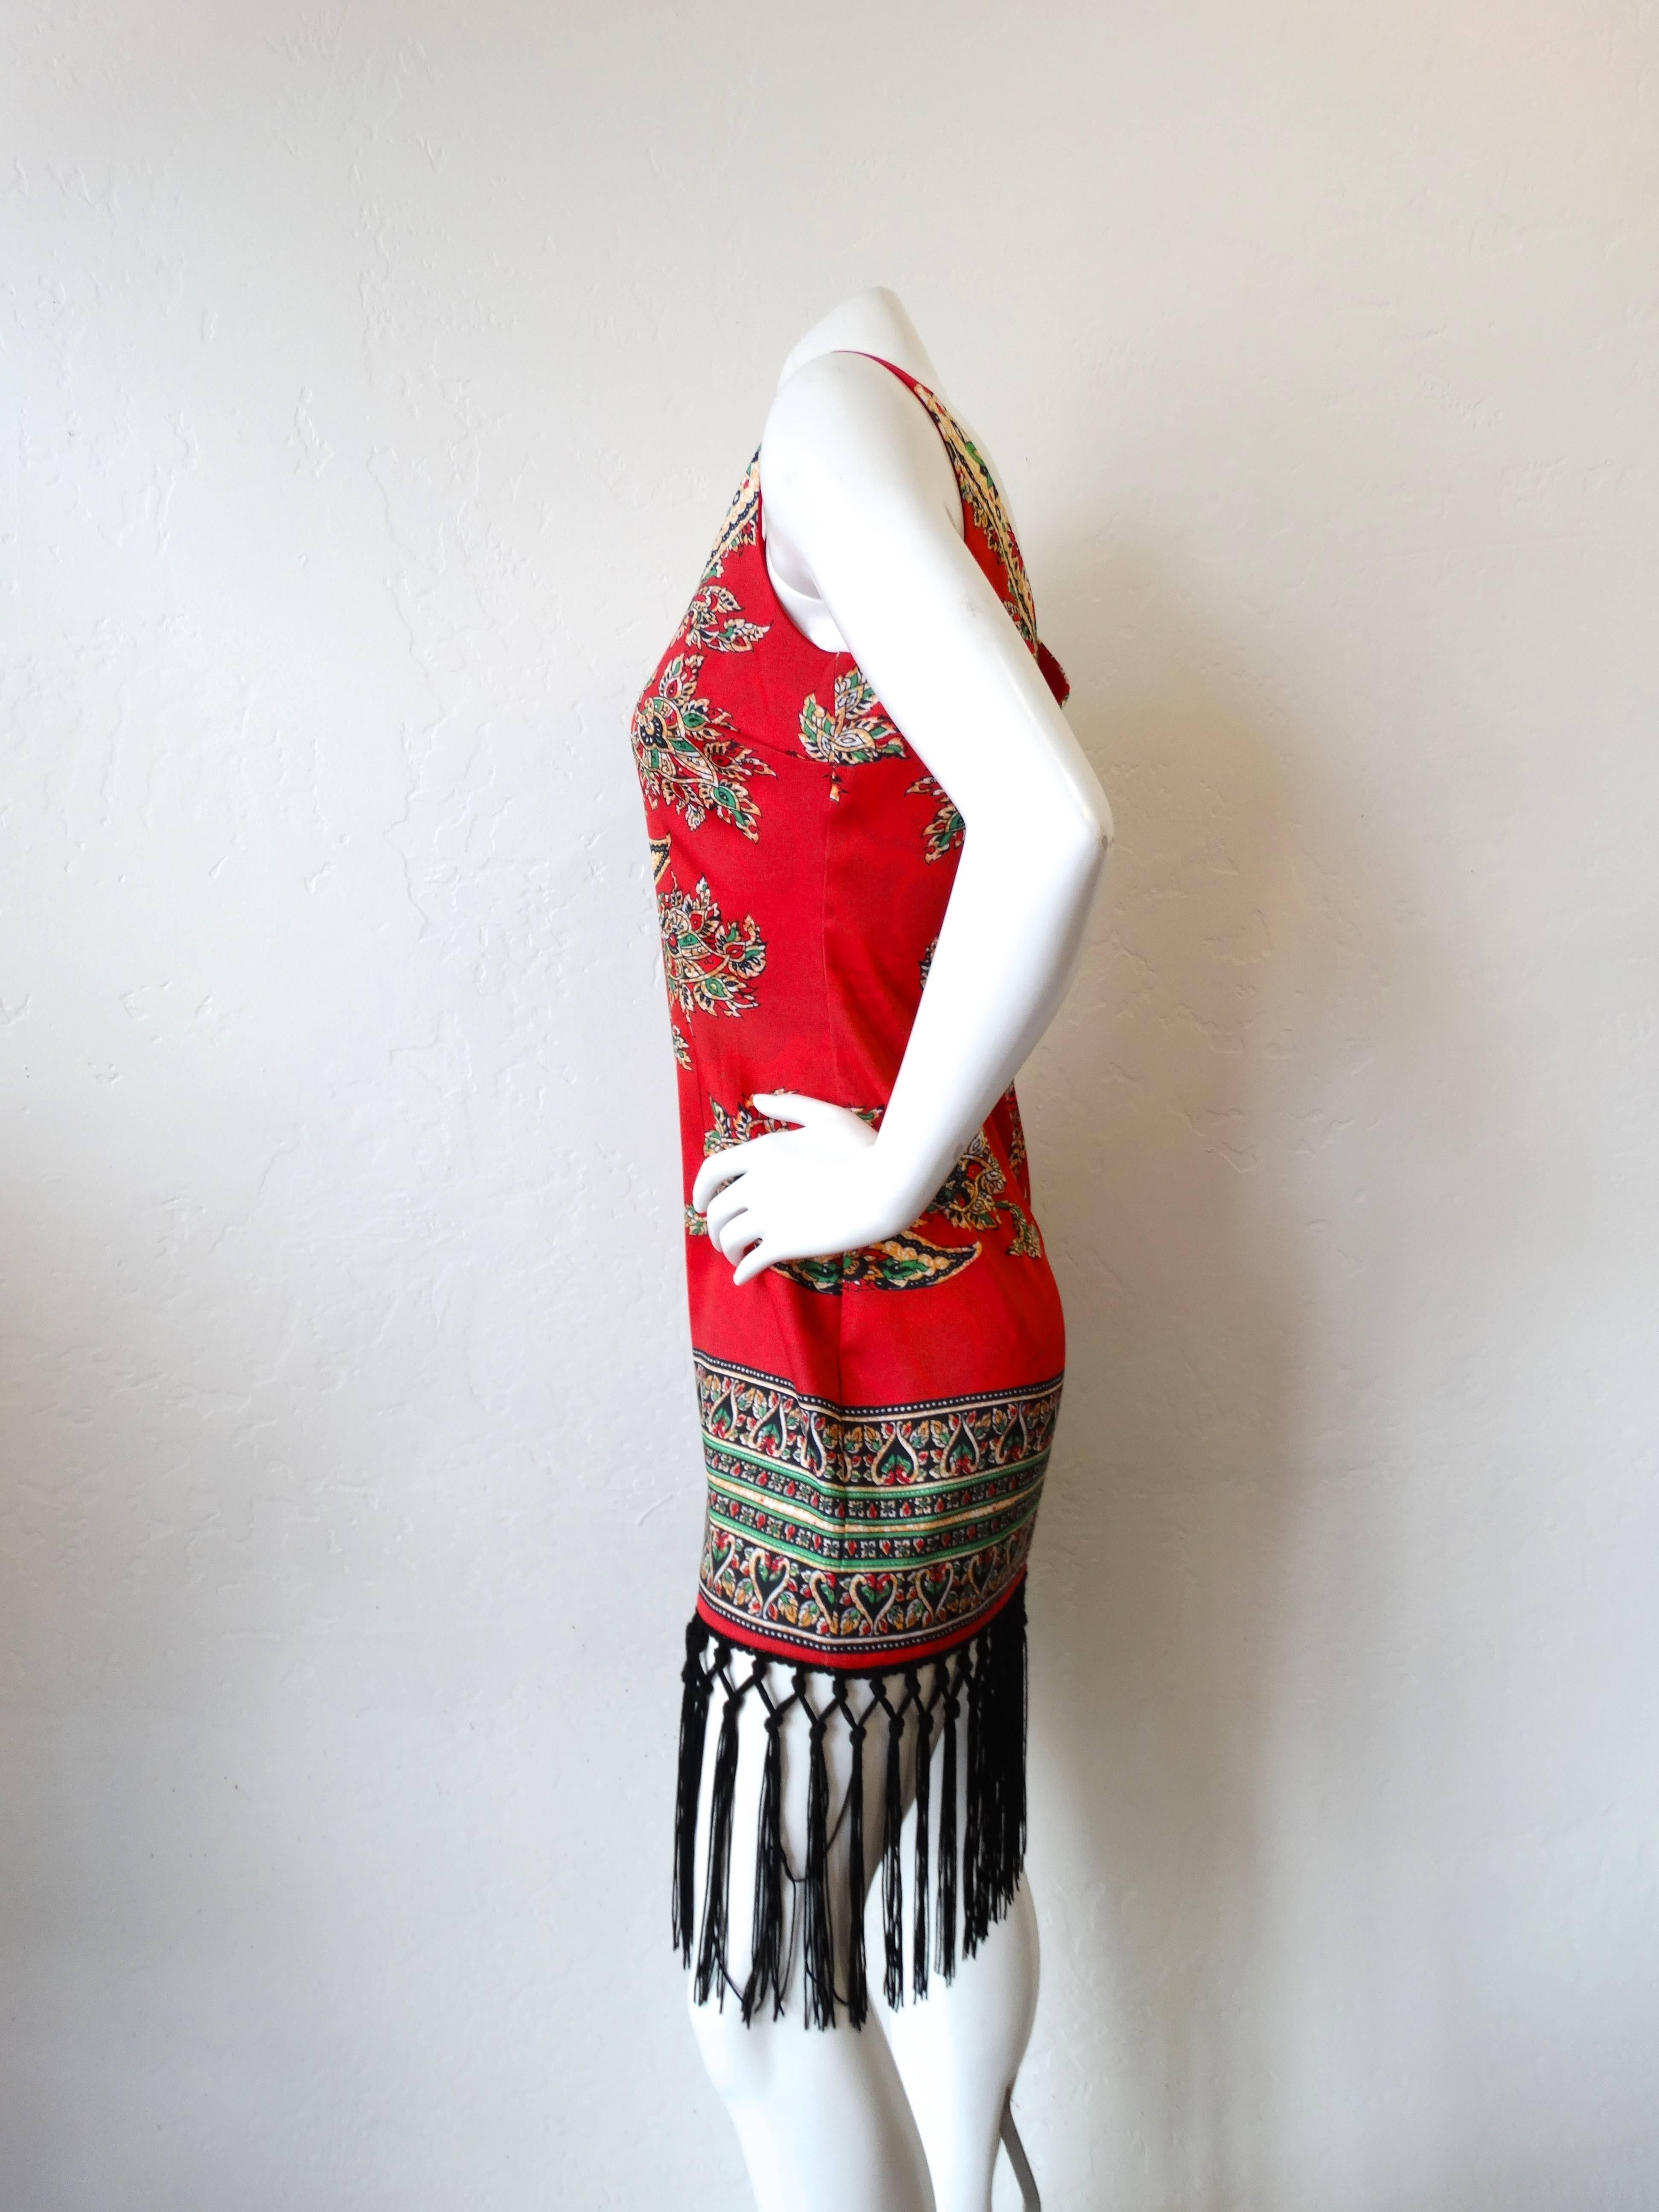 Incredible 1990s Dashiki printed dress with long black fringe trim! Sexy fitted silhouette with plunging V neck and back. Dashiki inspired print in a bold bright red! Hidden zipper up the back. Marked a size 8, best fits a Medium. 

Measurements: